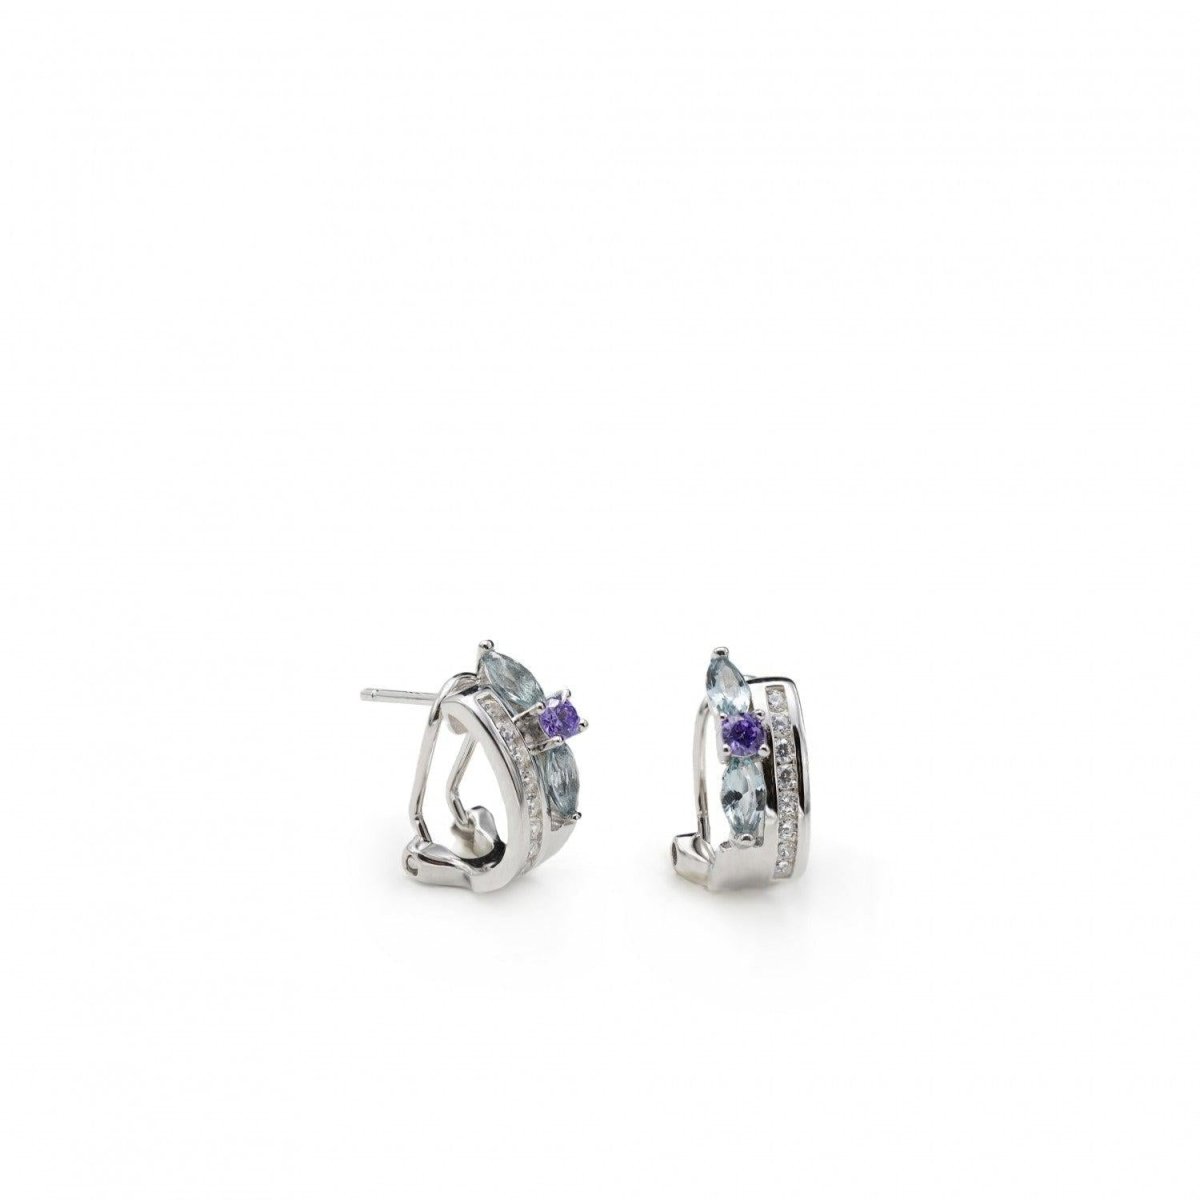 Earrings - Earrings with omega clasp design adamantine quartz and zircons